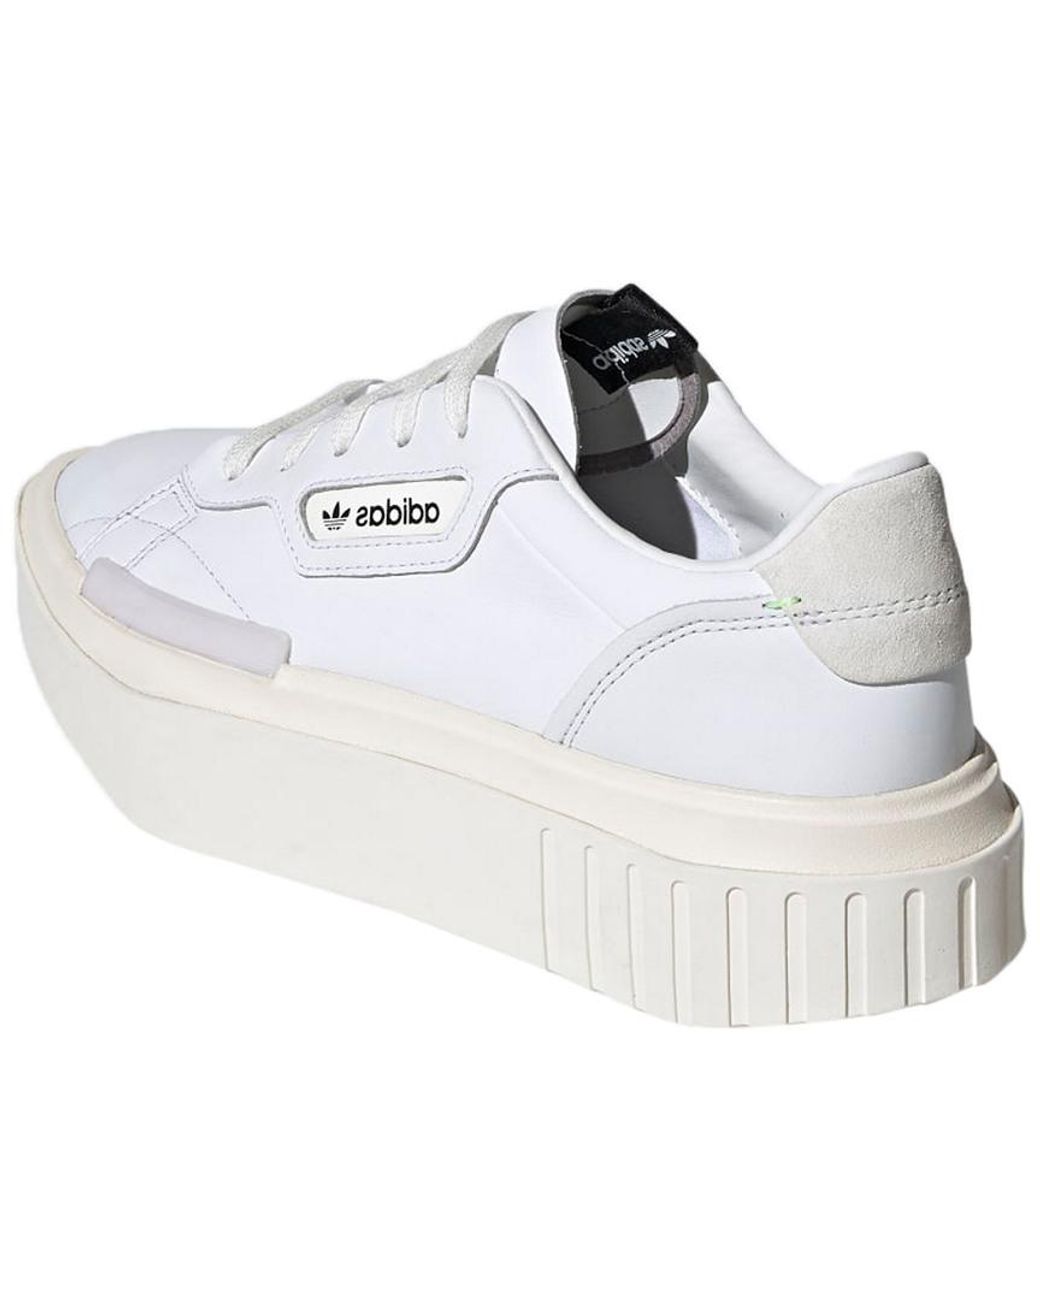 adidas Leather Hypersleek Shoes in White | Lyst